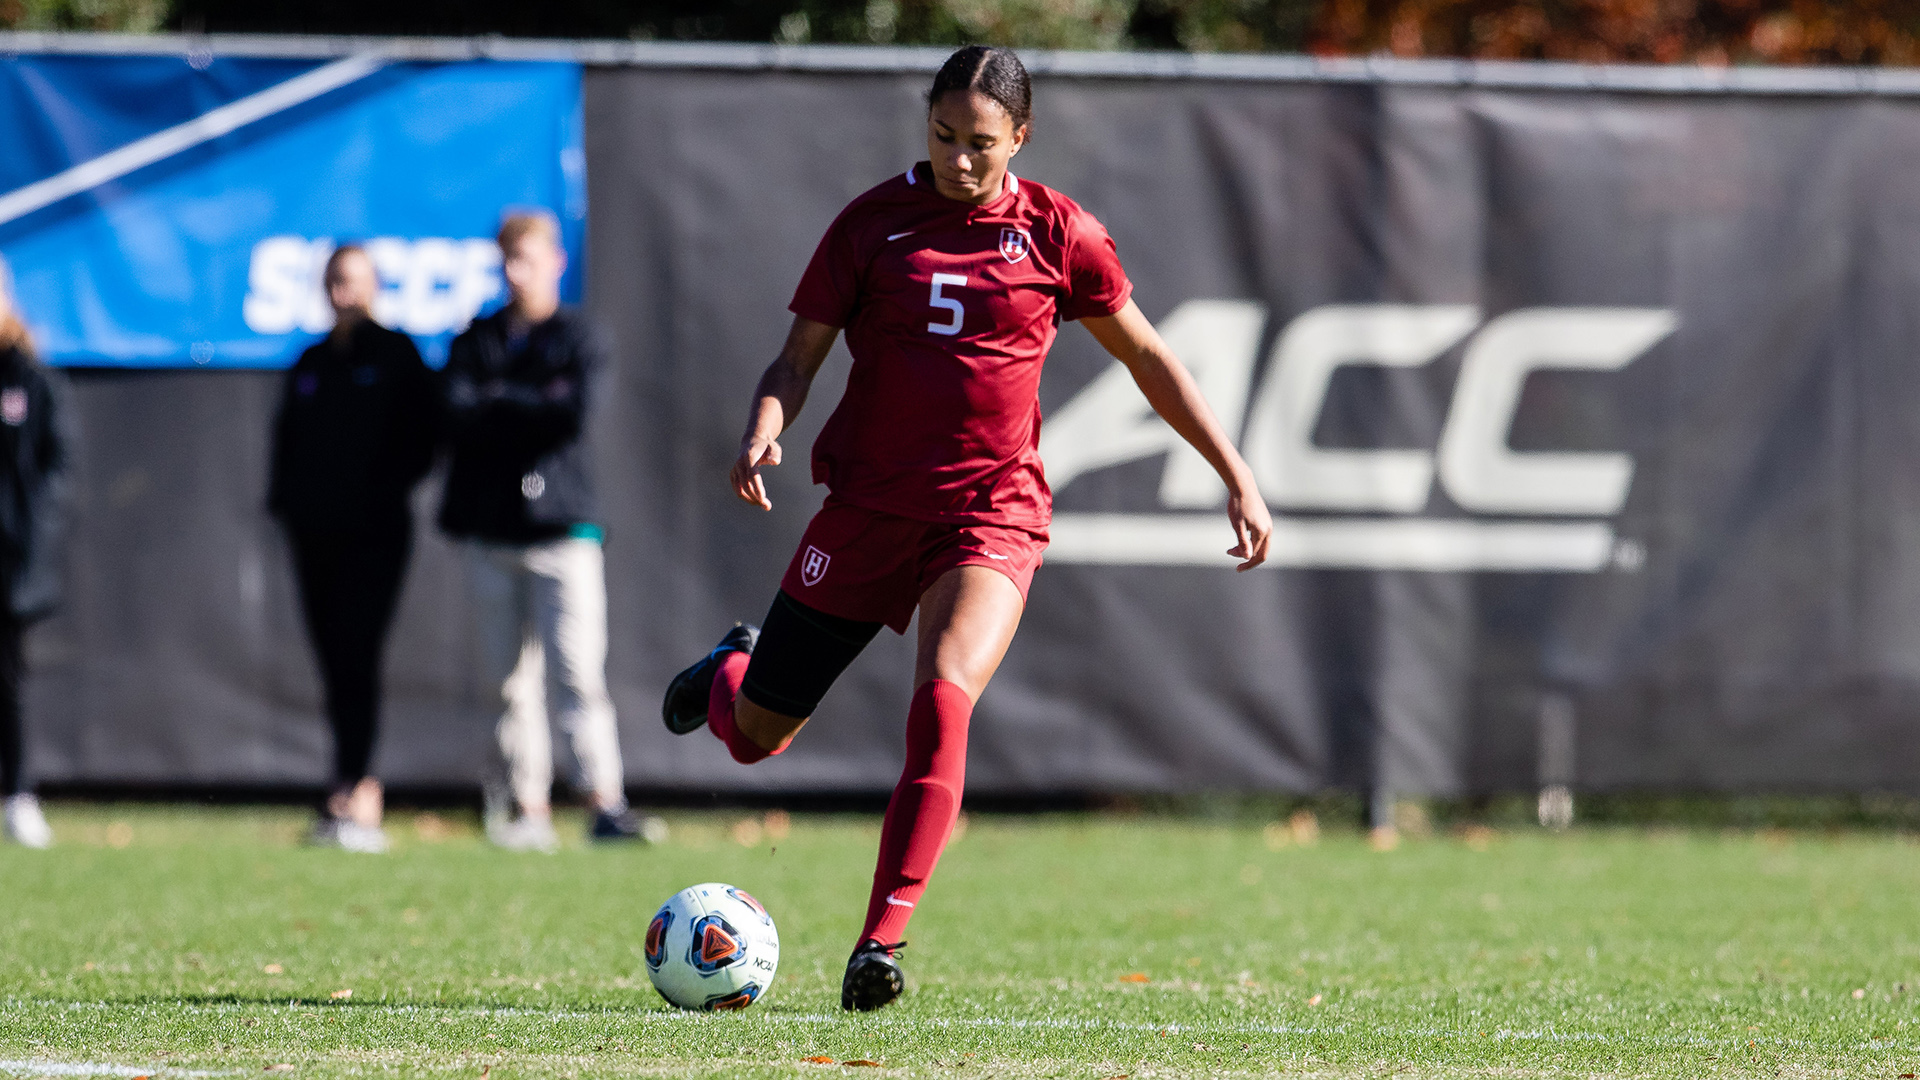 18 DI players called up to Canada U20 WNT